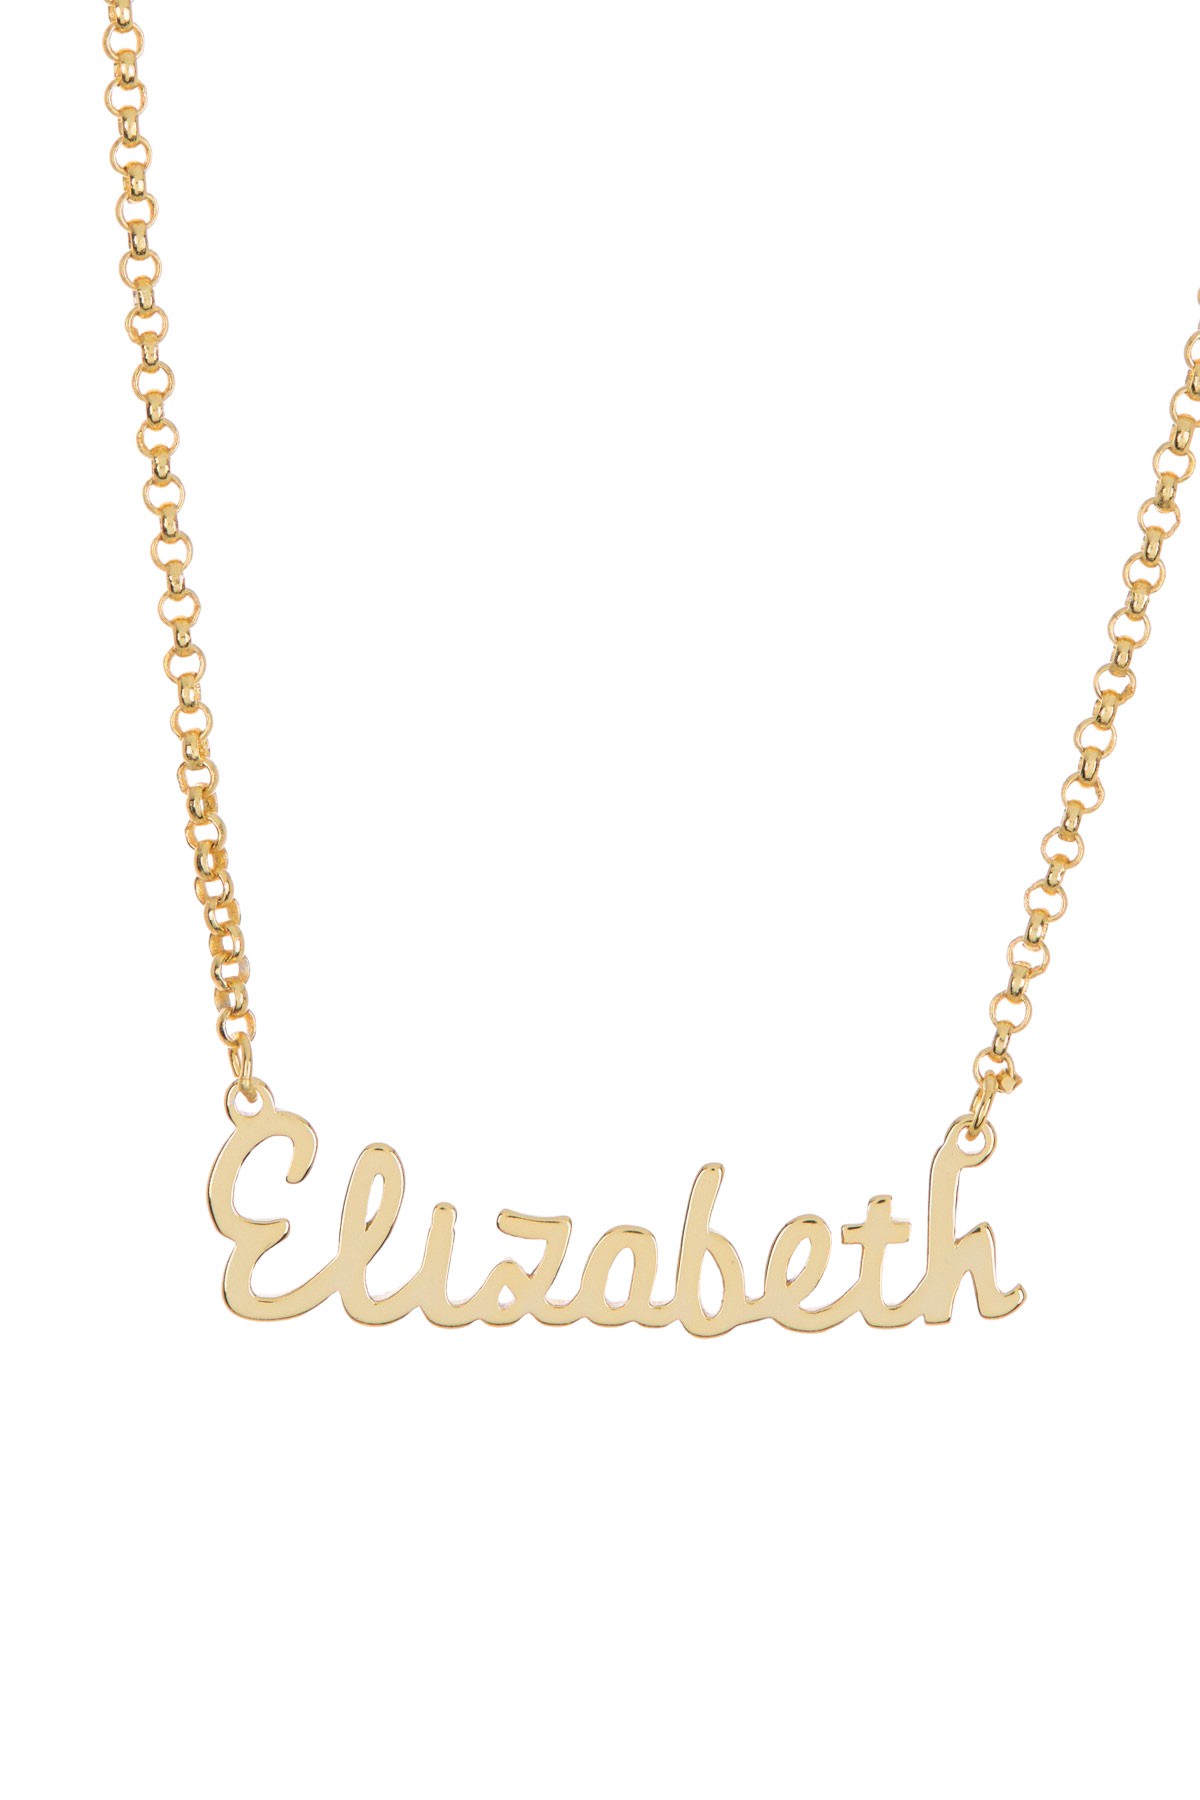 18K Yellow Gold Plated Sterling Silver 'Elizabeth' Name Pendant Necklace Argento Vivo